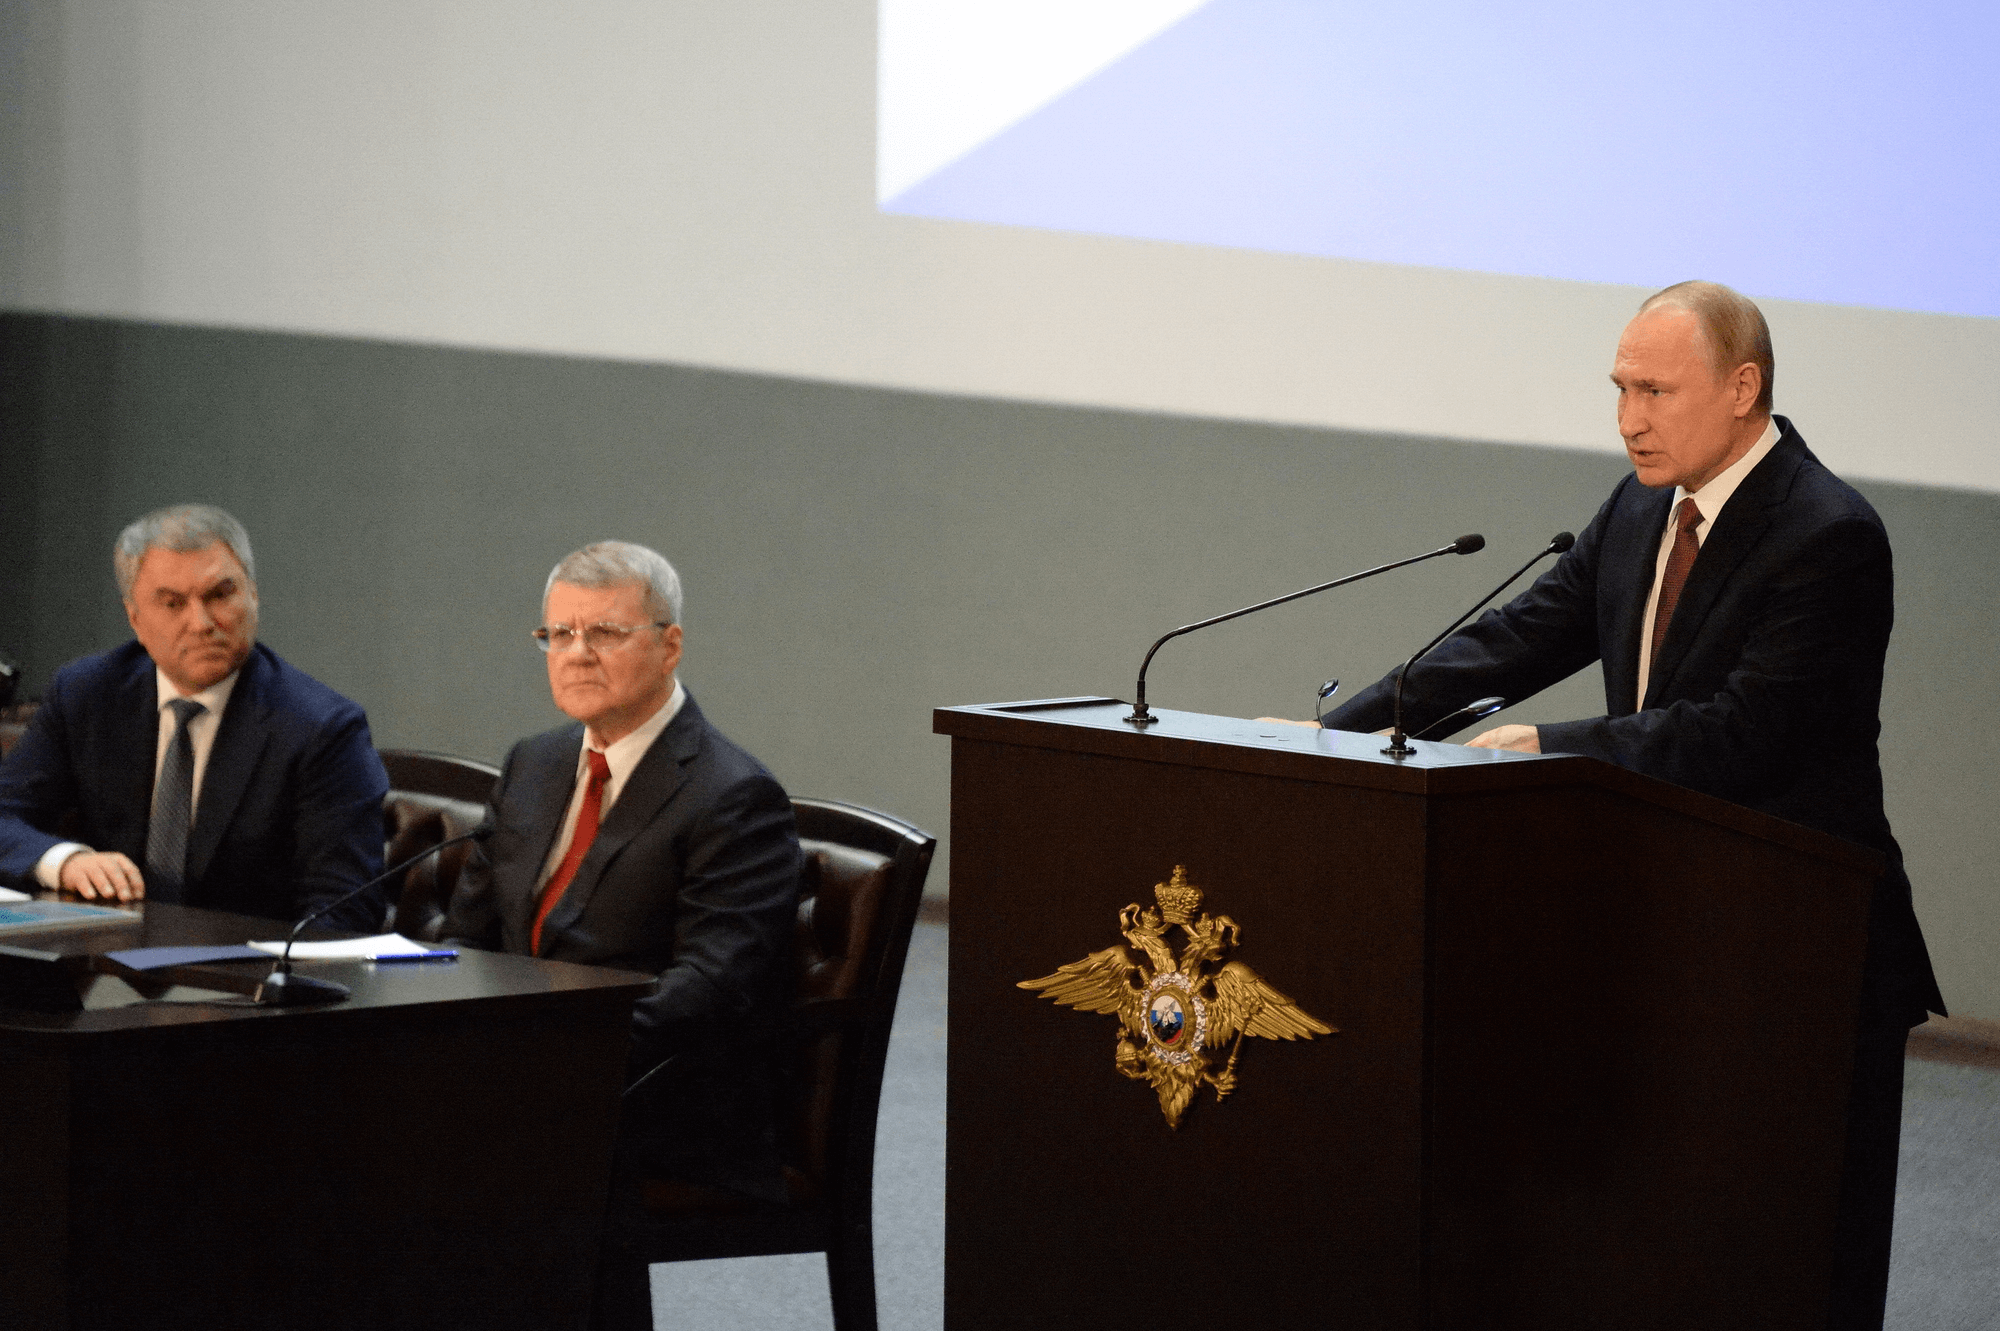 The Hague Tribunal: What will russia be tried for and how? VoxCheck explains